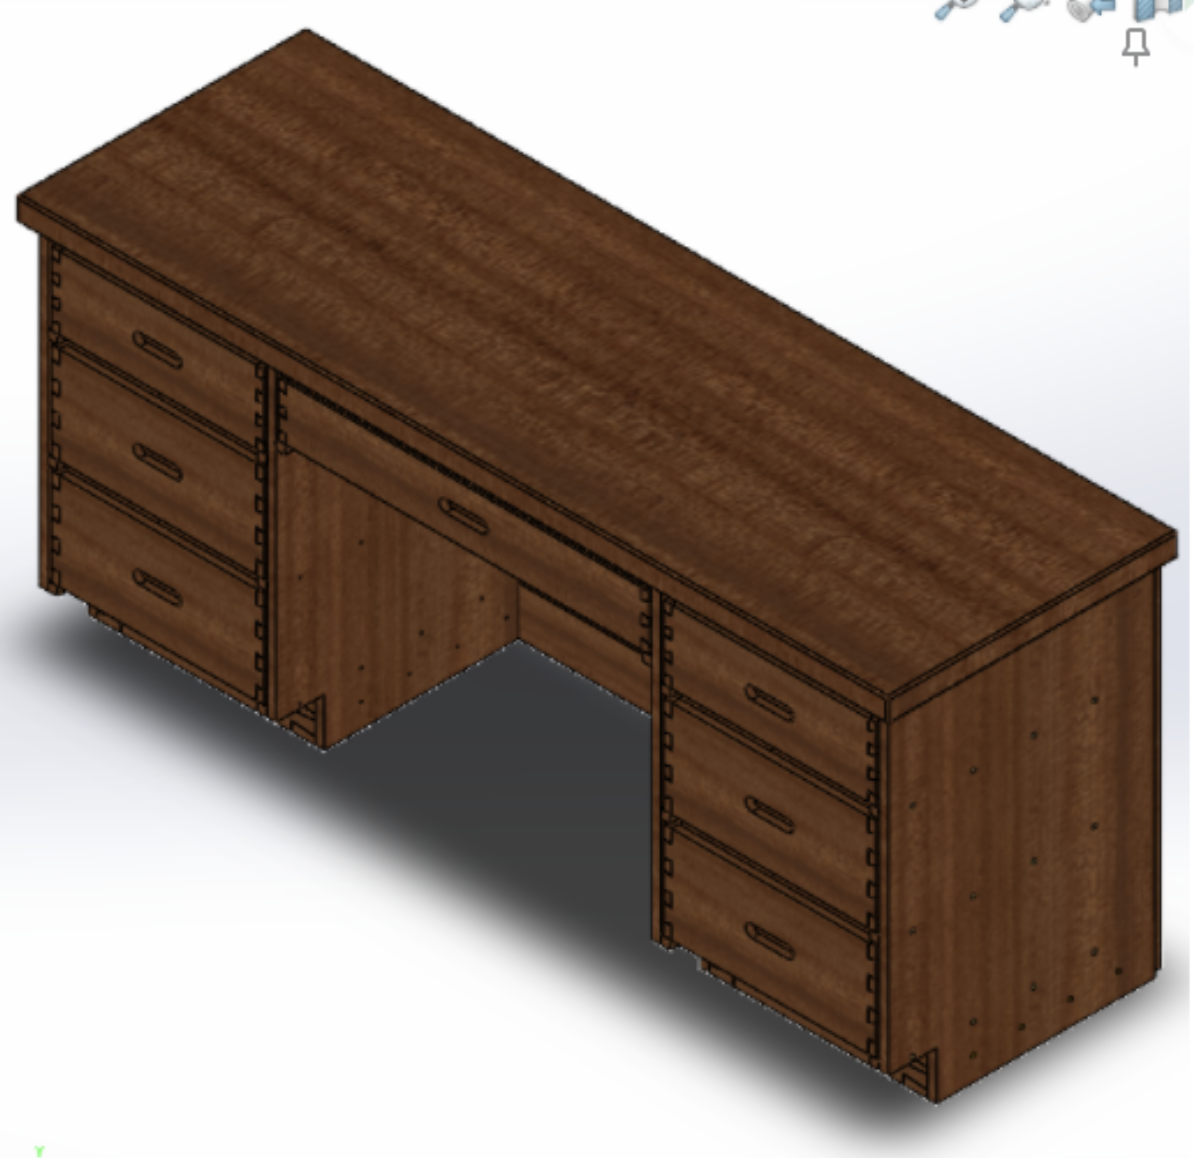 3D Solid Works drawing of a desk with drawers